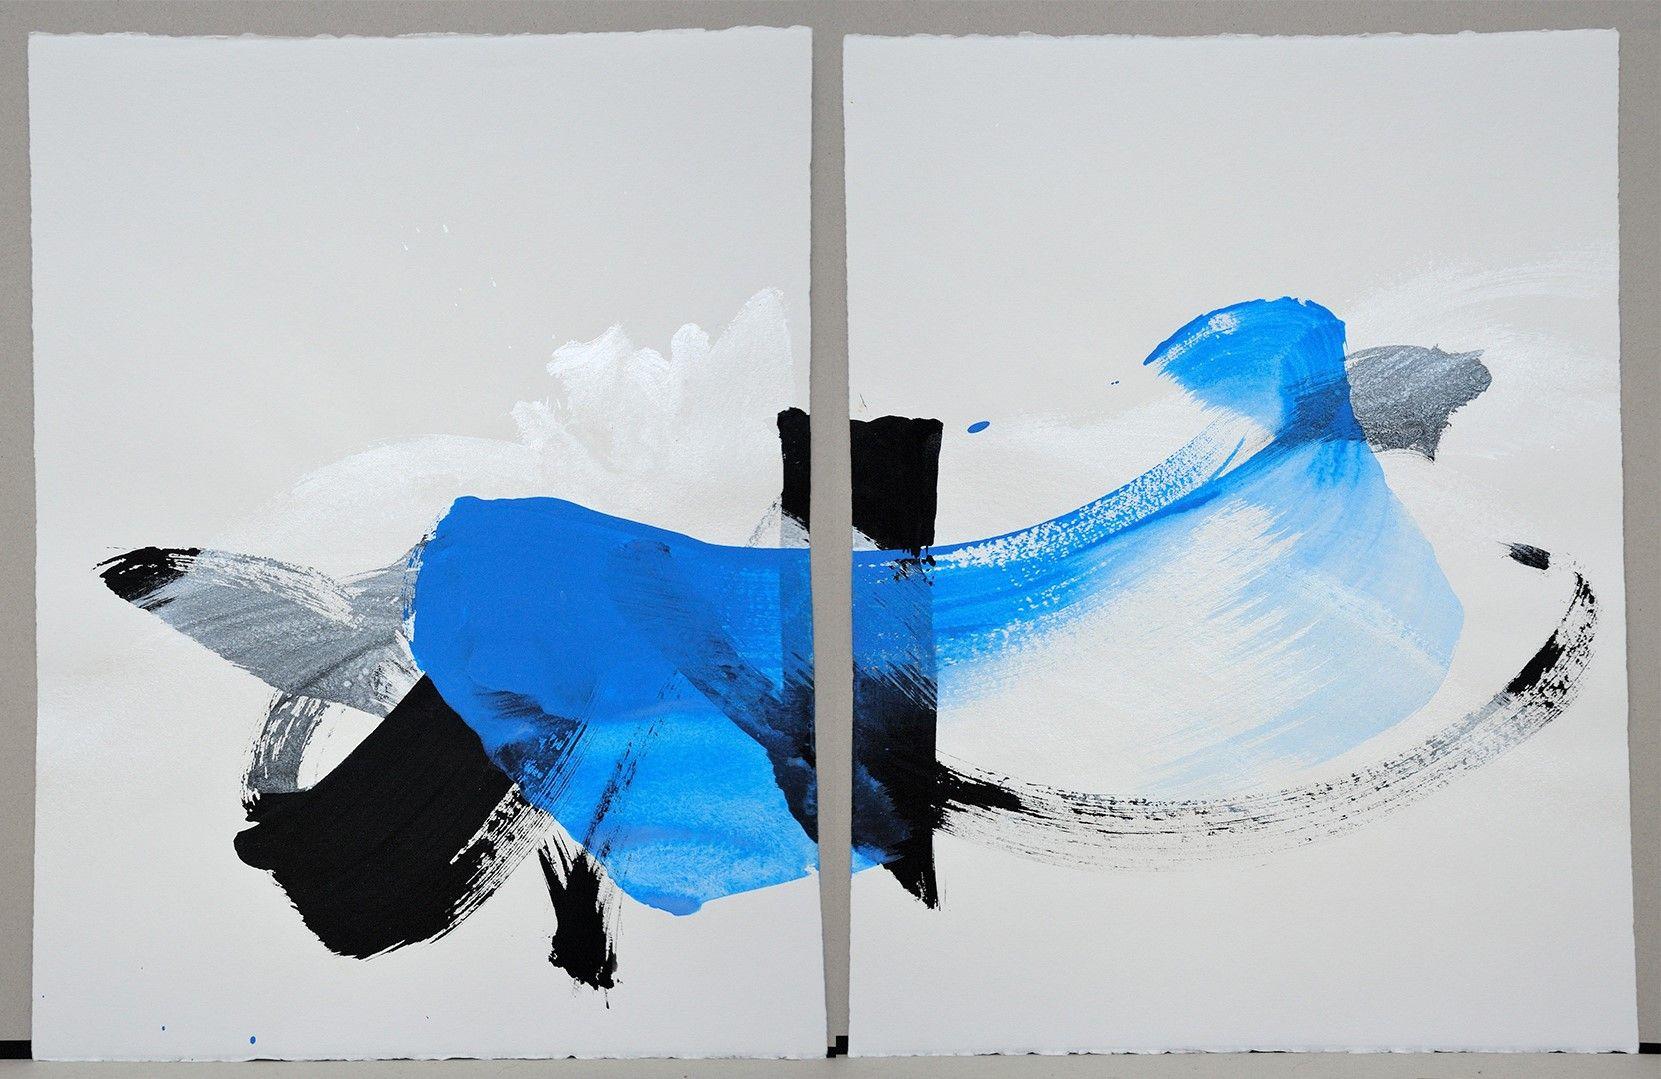 Permanescence N548-D is a unique diptych painting by Japanese contemporary artist Hachiro Kanno. The painting is made with ink and acrylic on paper, dimensions are 65 × 100 cm (25.6 × 39.4 in). This diptych artwork is composed of two paintings each